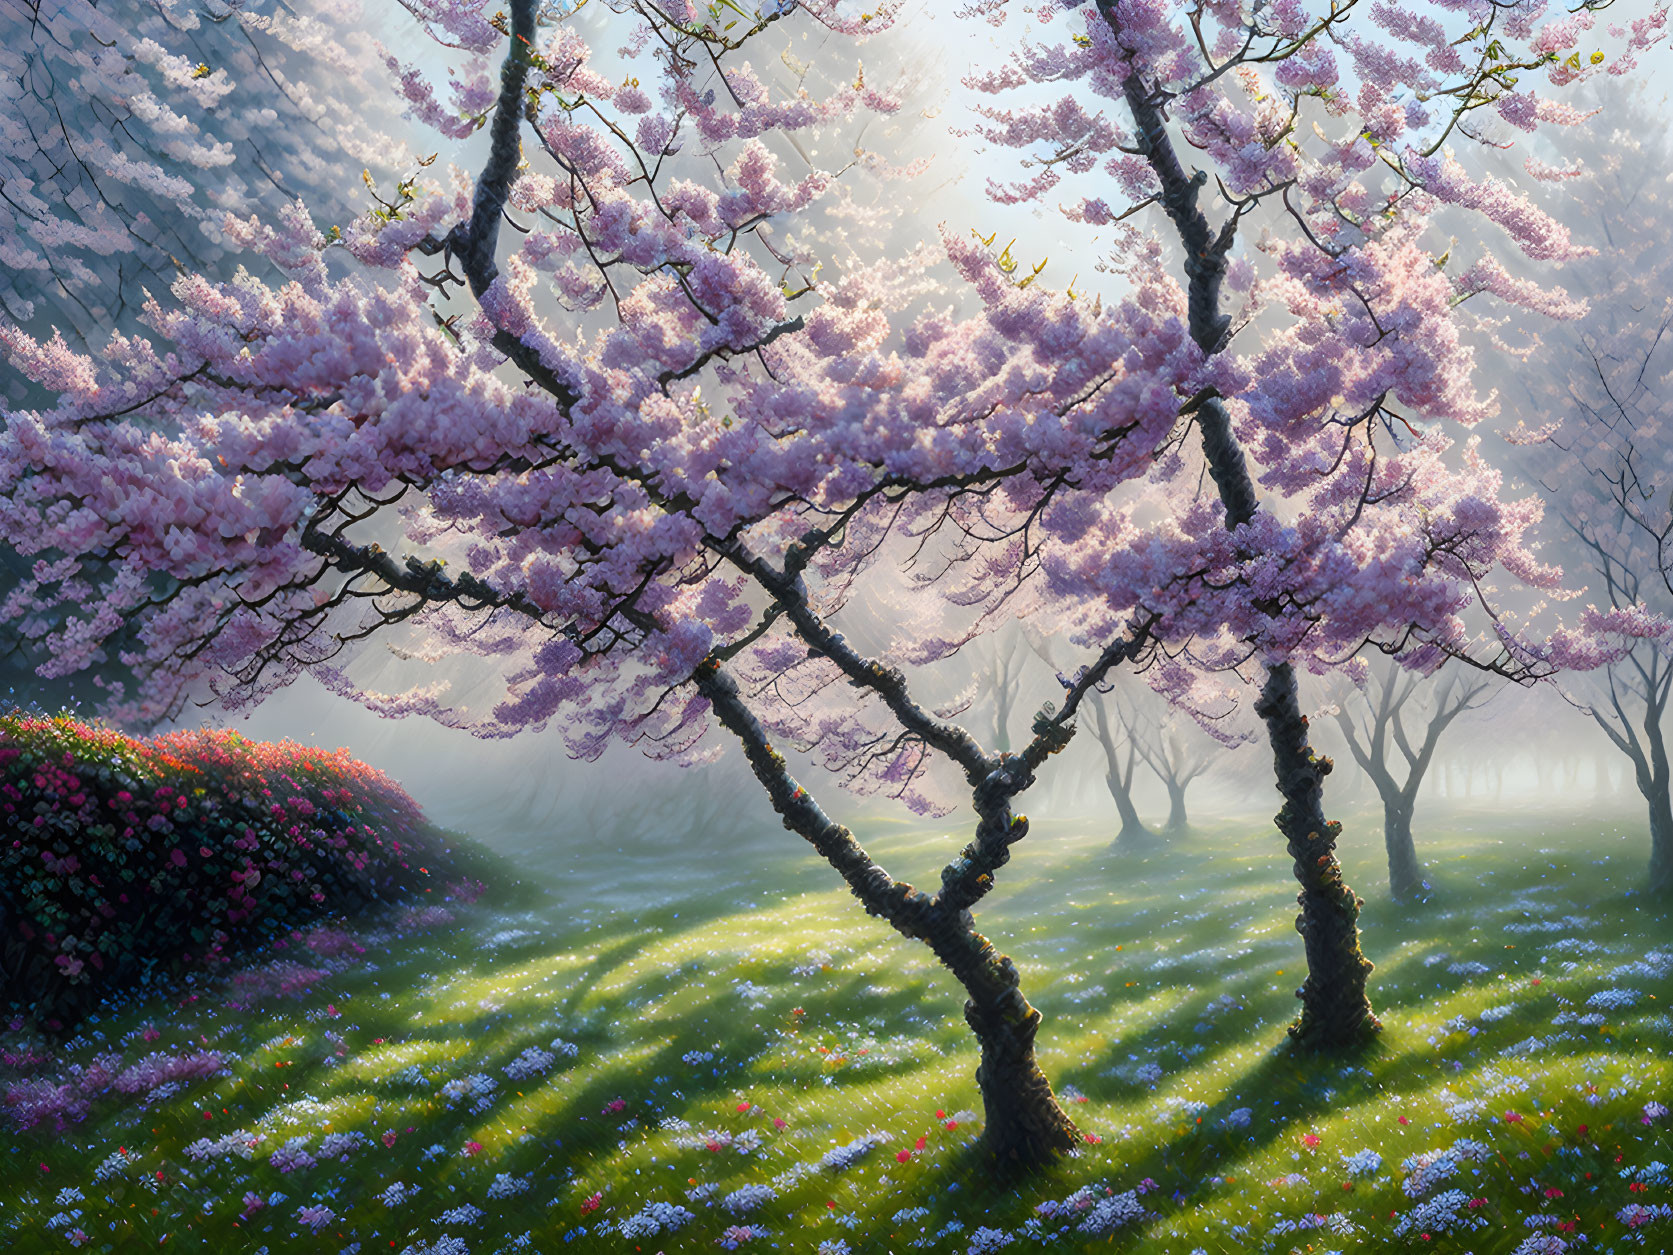 Tranquil Cherry Blossom Landscape with Pink Flowers